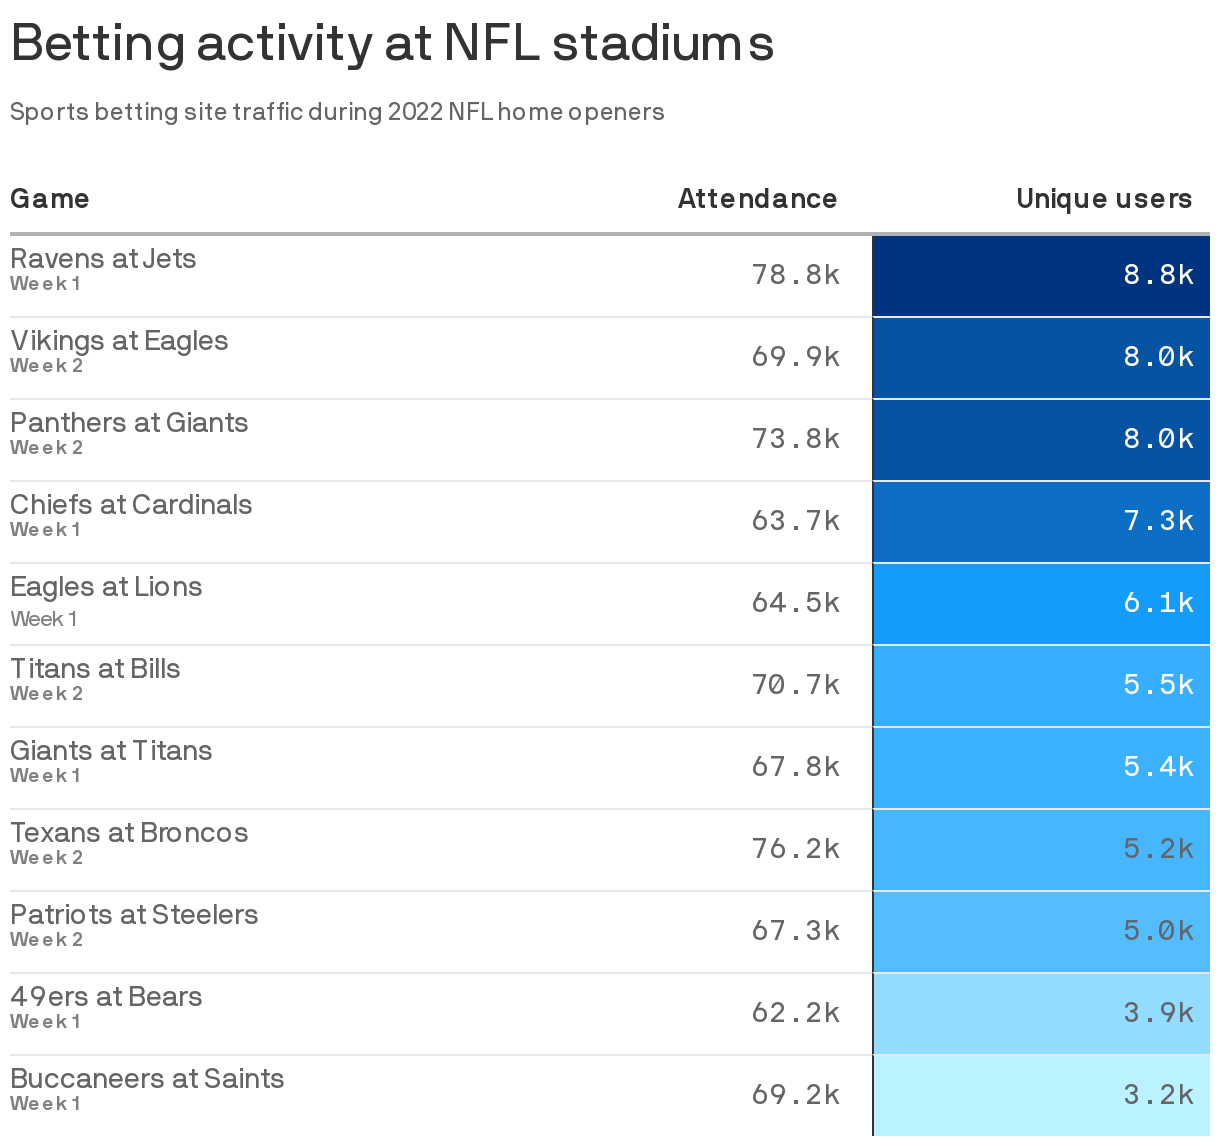 Betting activity at NFL stadiums